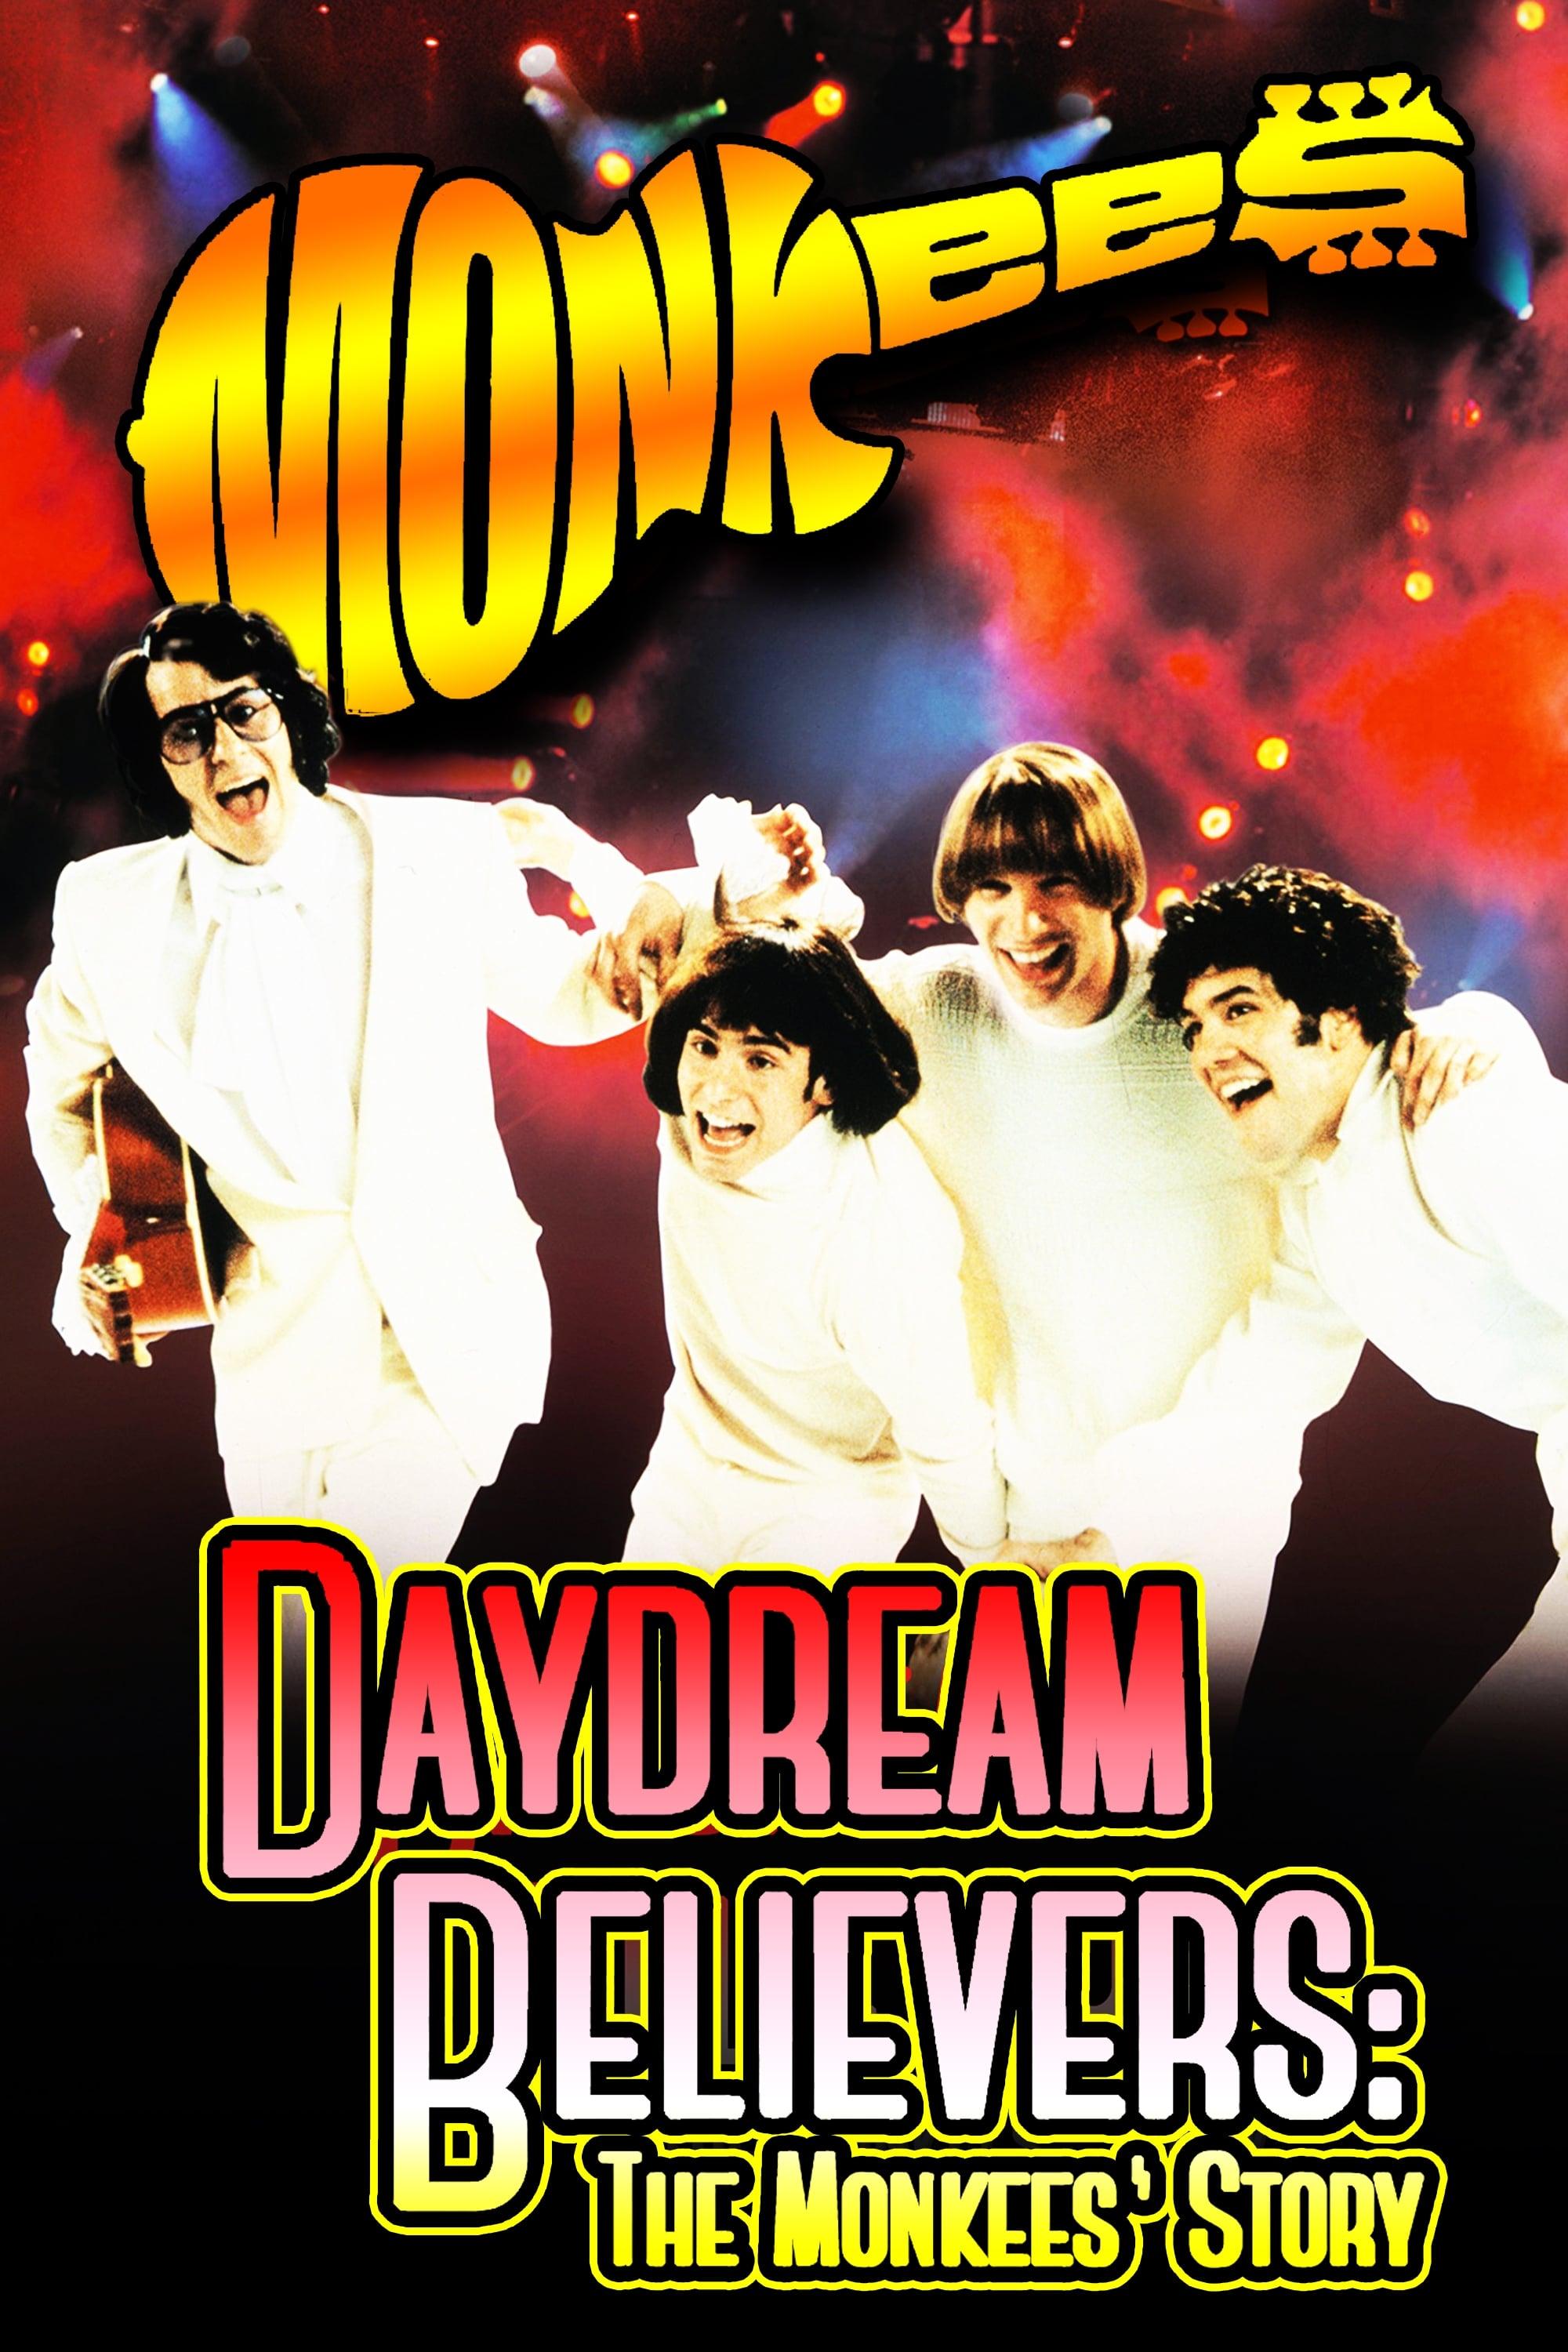 Daydream Believers: The Monkees' Story poster